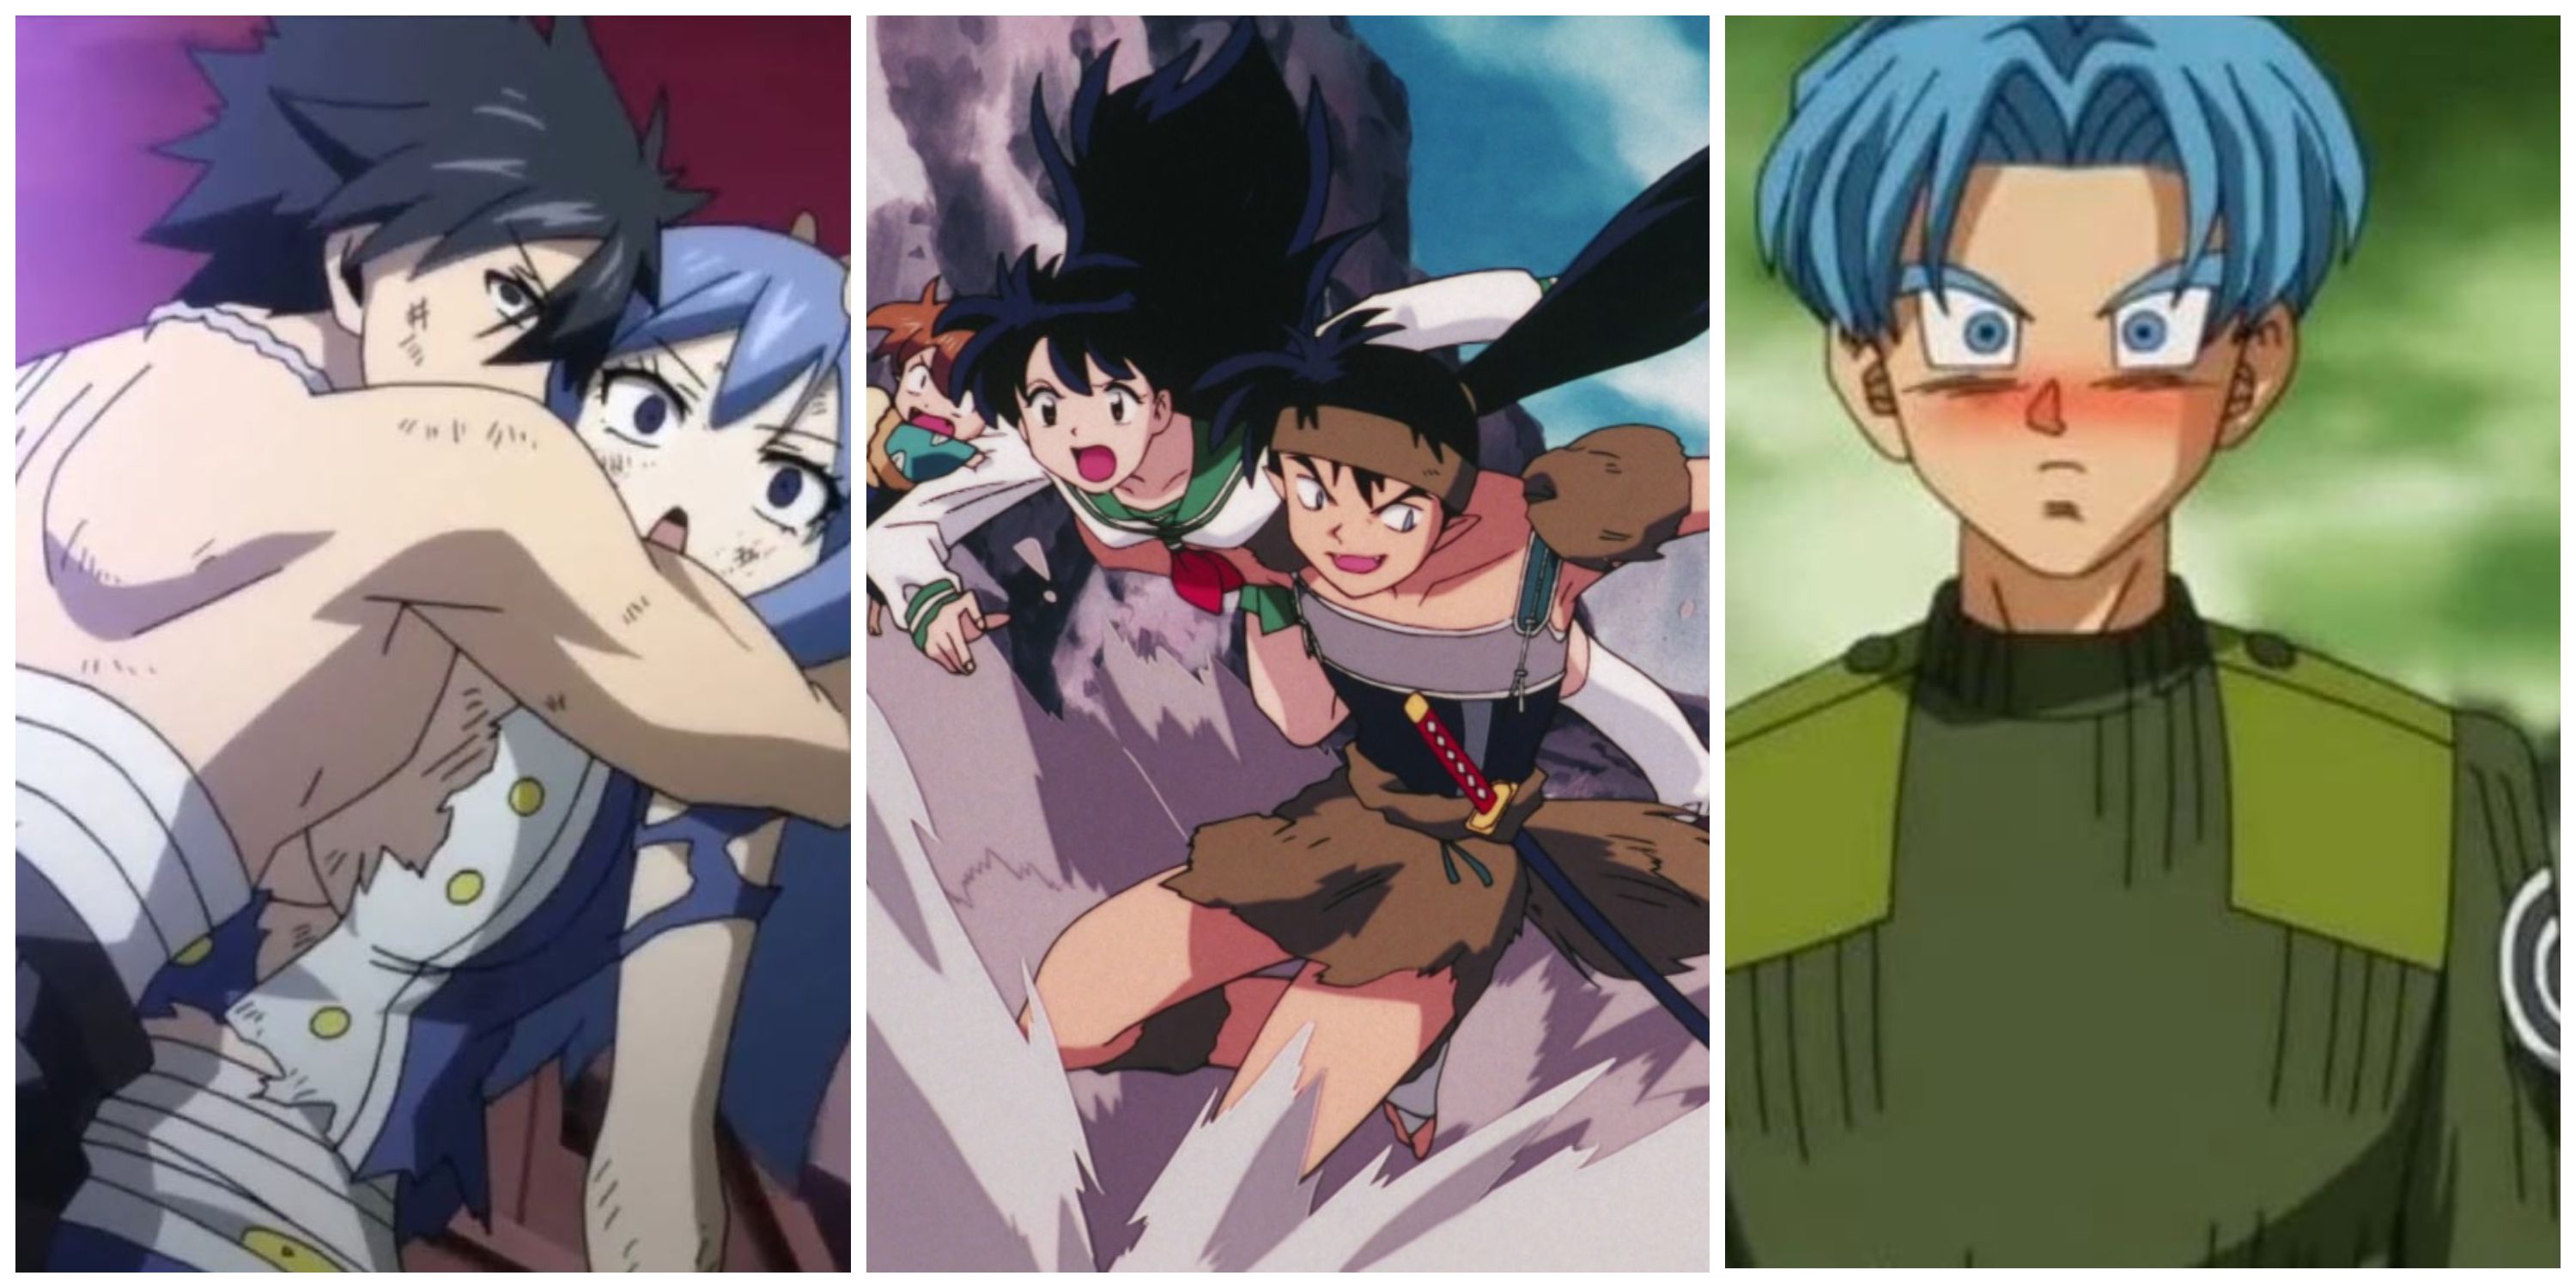 Juvia and Gray from Fairy Tail, Koga, Kagome and Shippo from InuYasha, and Trunks from Dragon Ball.